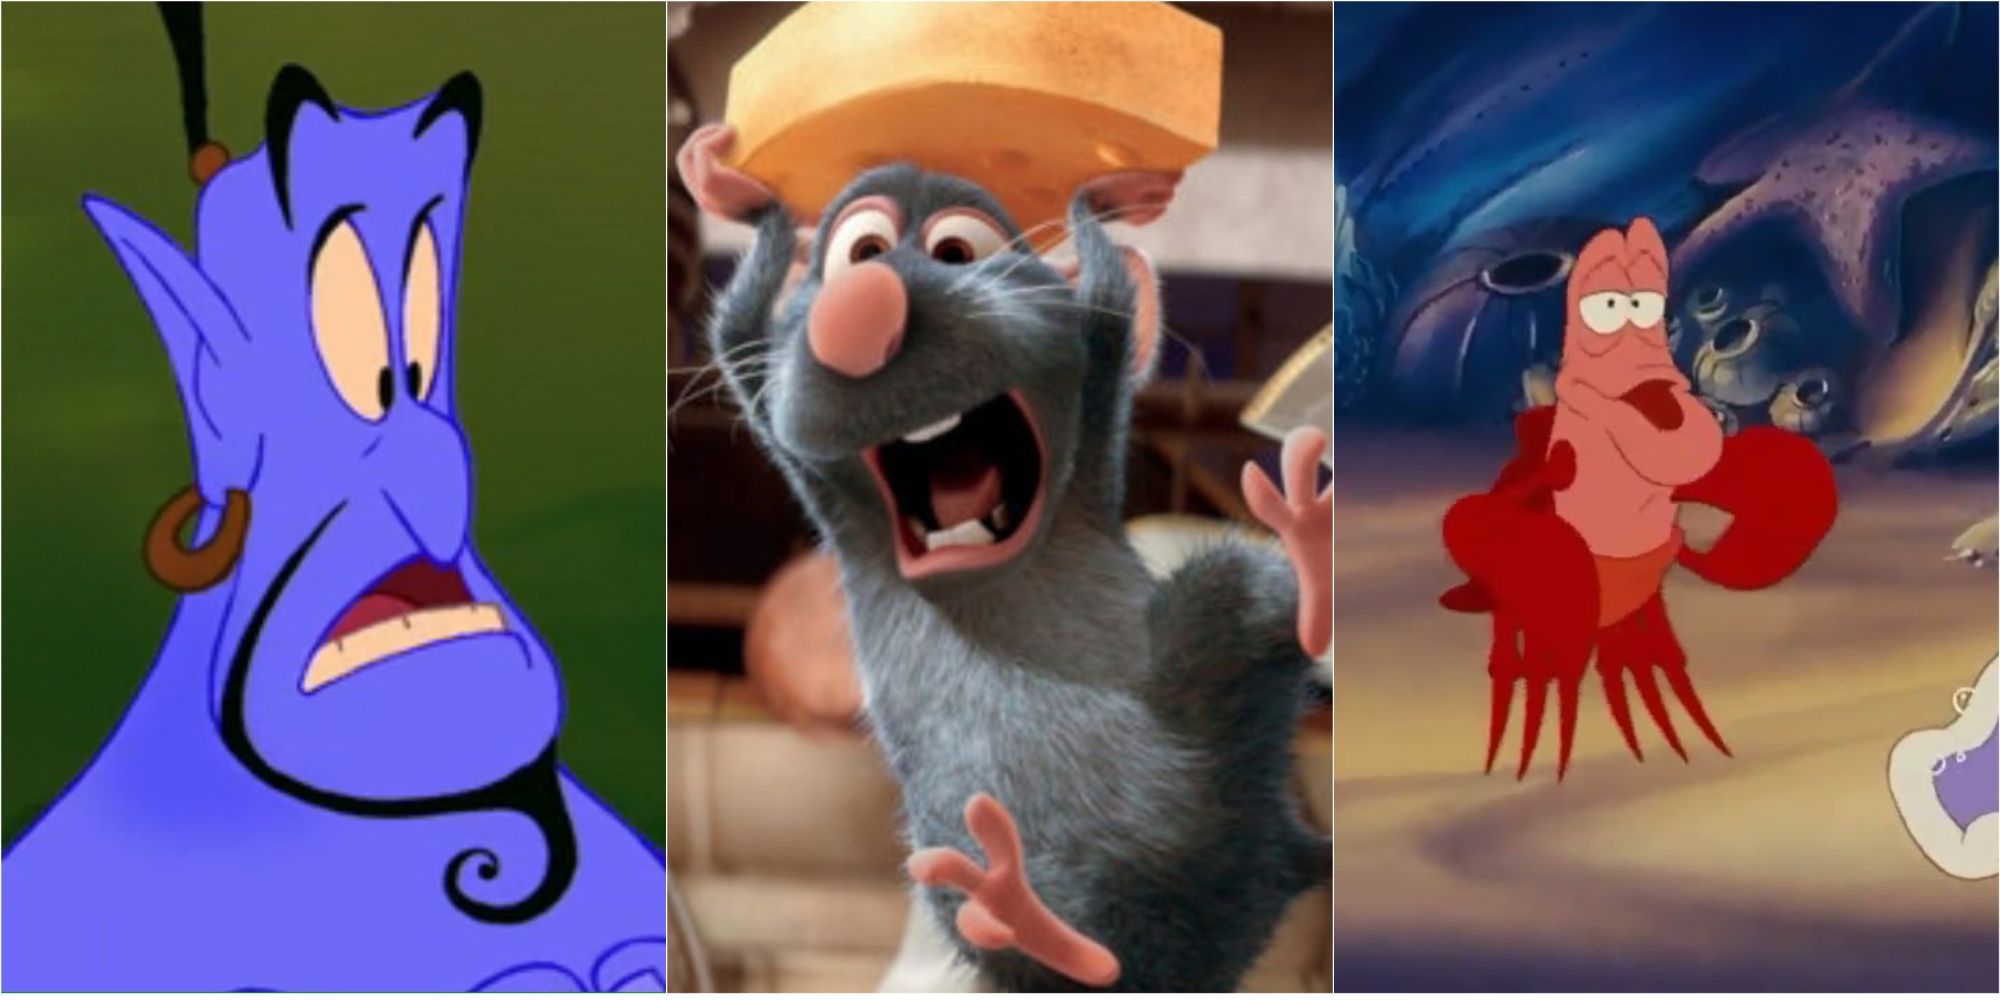 Aladdin: Differences Between Disney's Version And The Original Tale